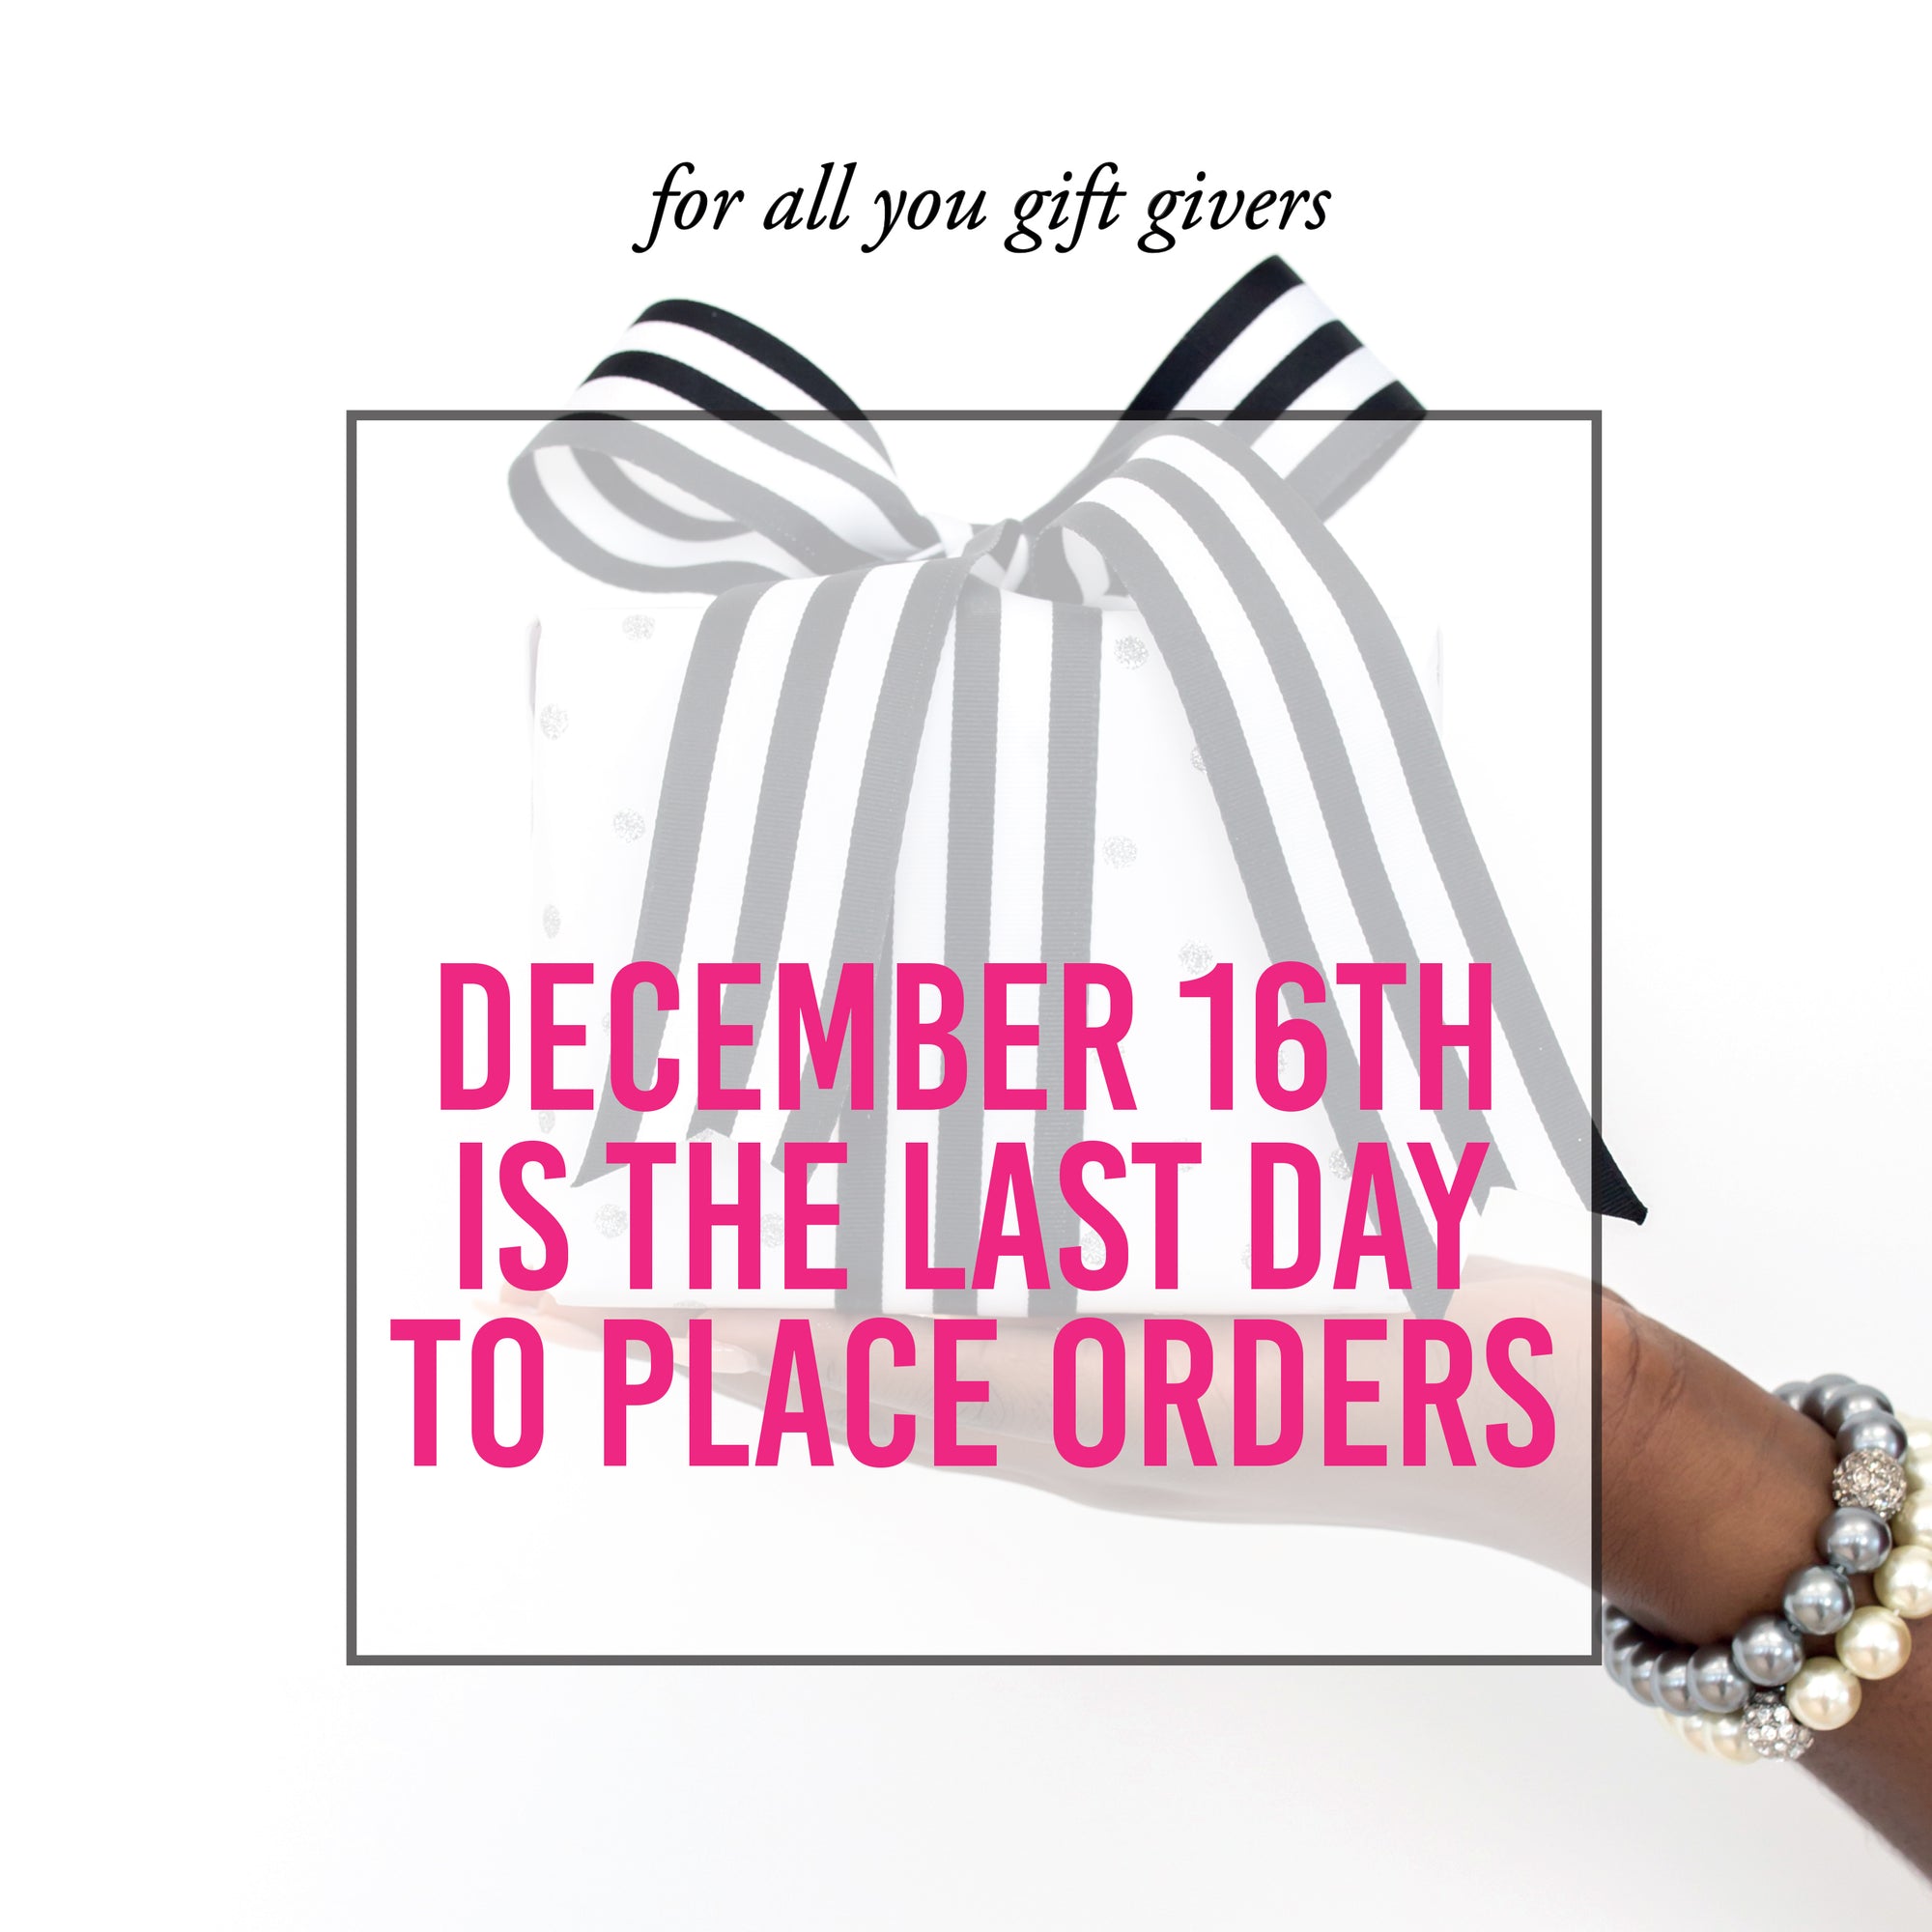 ONLY 3 MORE DAYS TO SHOP!